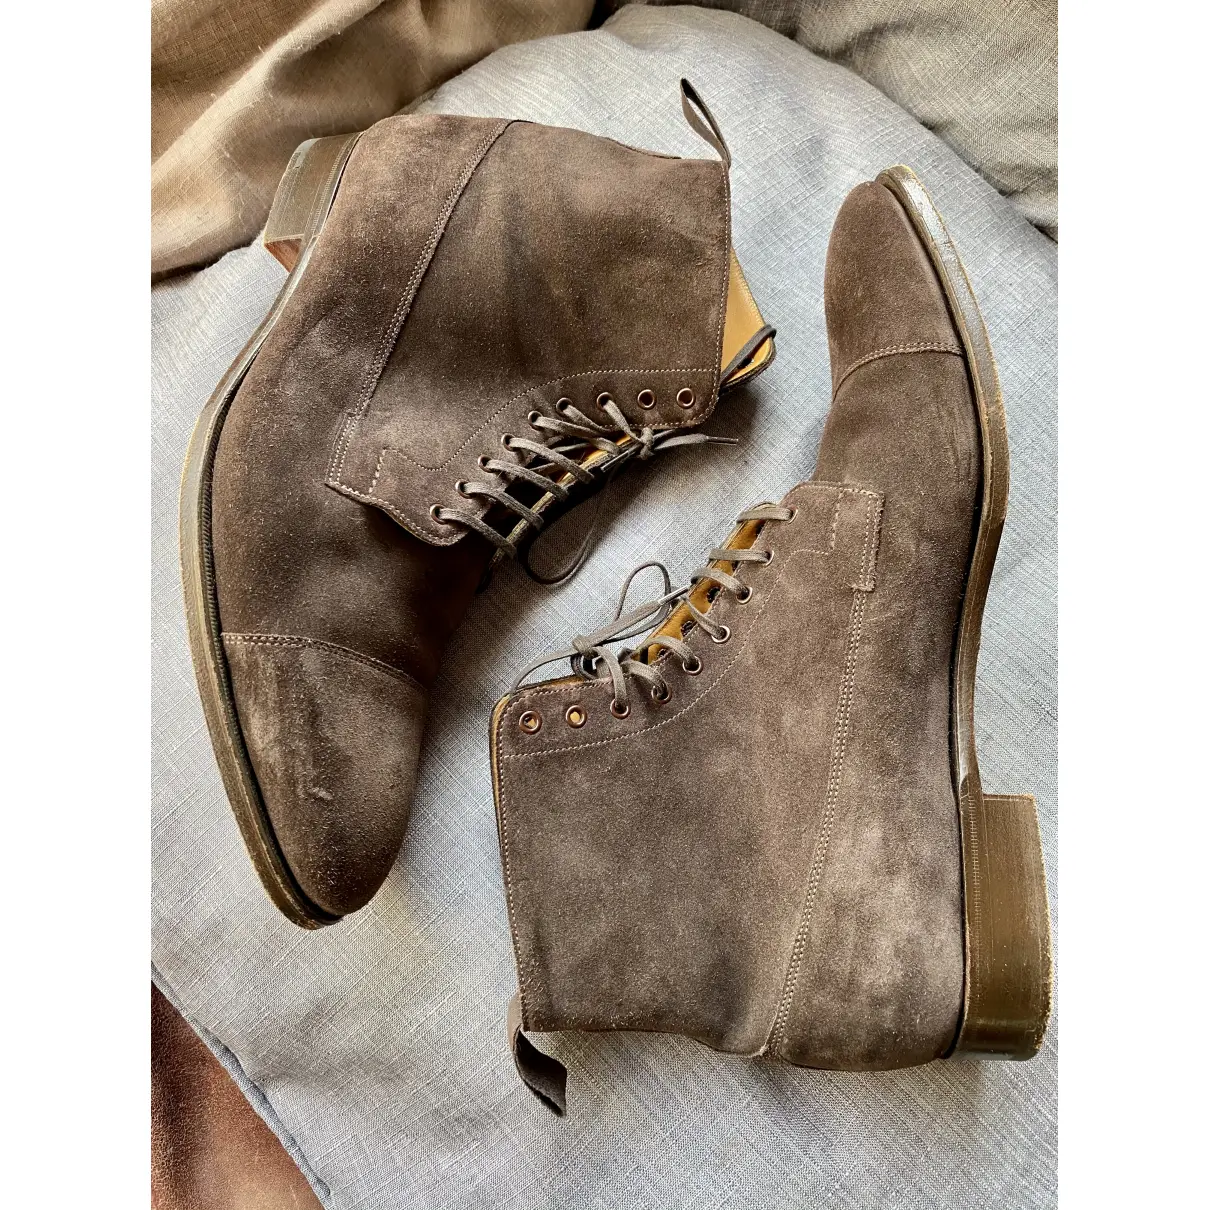 Buy Edward Green Brown Suede Boots online